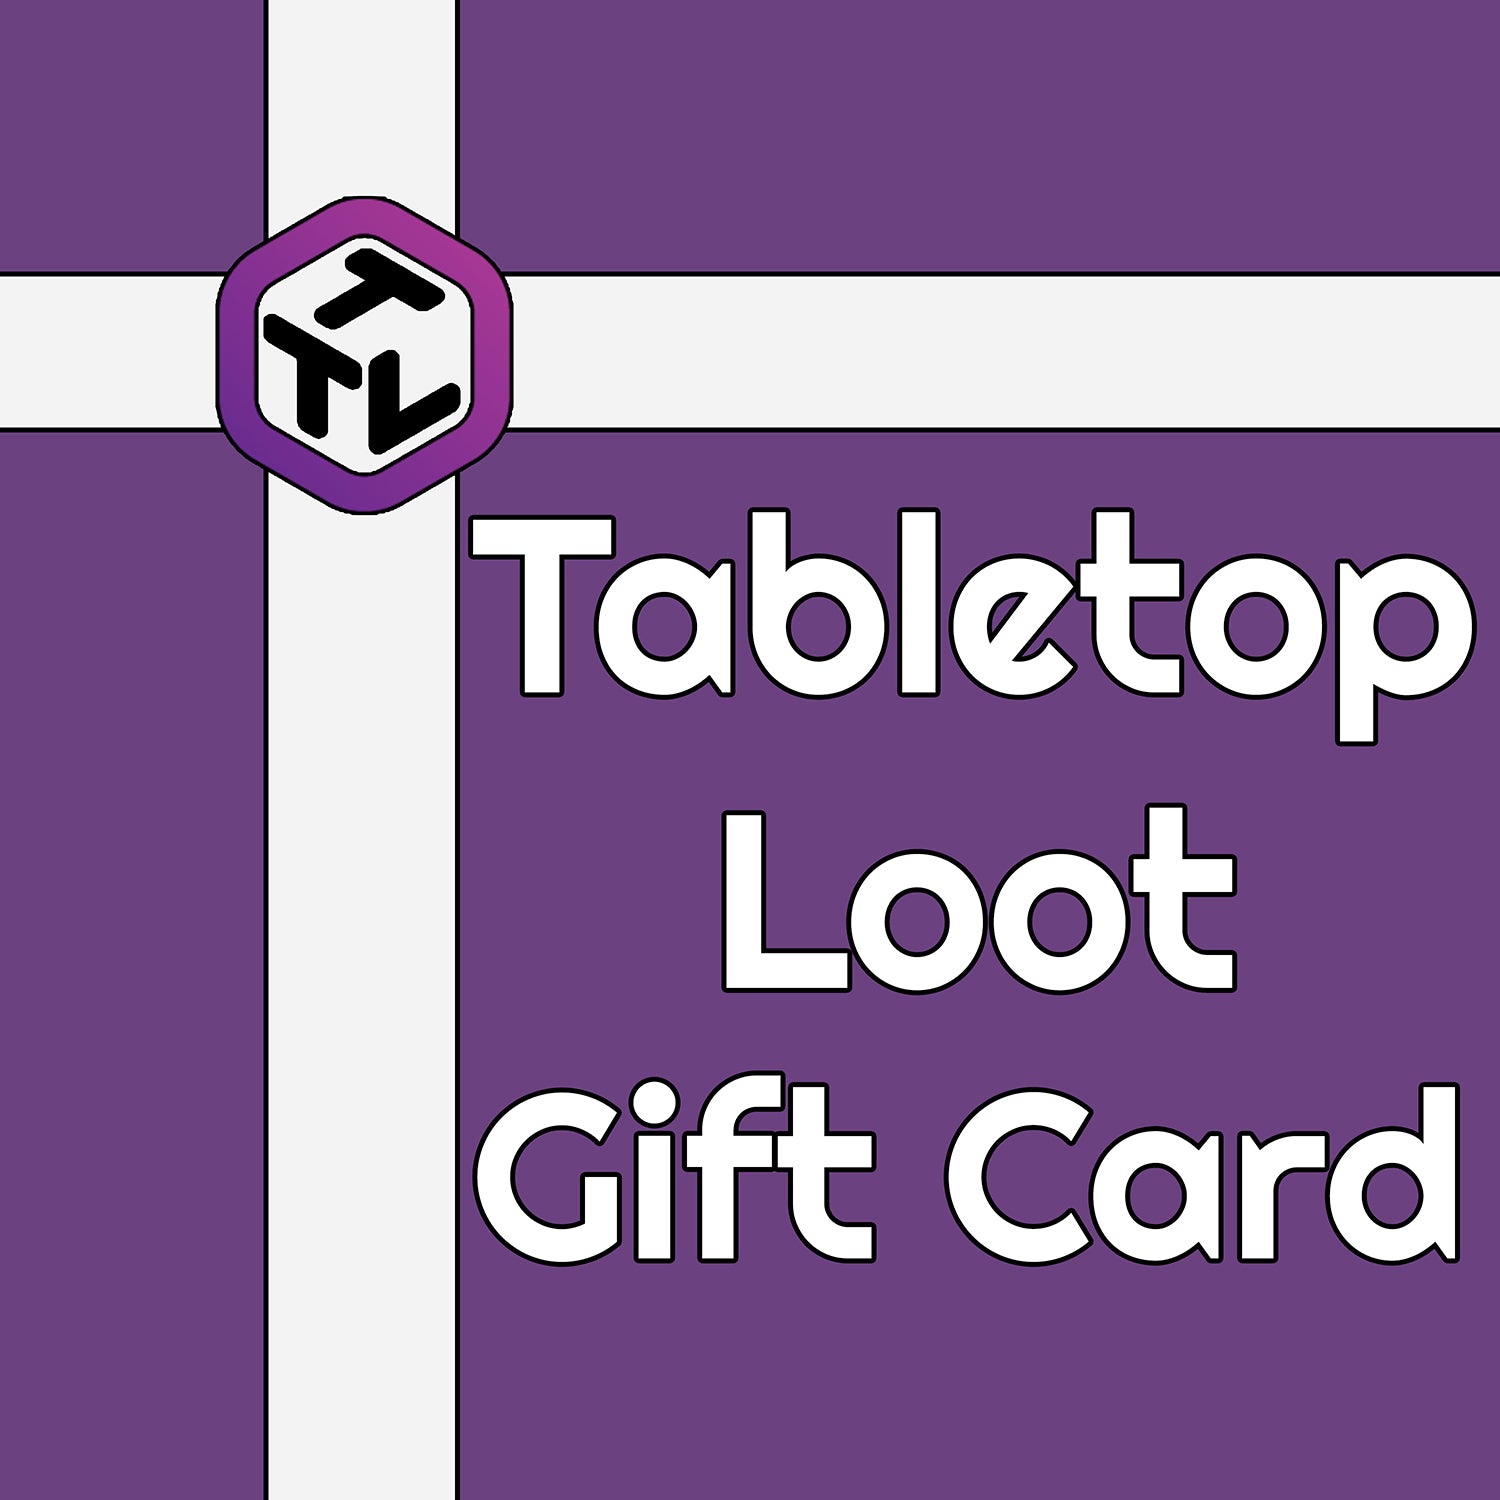 A graphic reminiscent of a present wrapped with a white ribbon and the Tabletop Loot logo says "Tabletop Loot Gift Card".